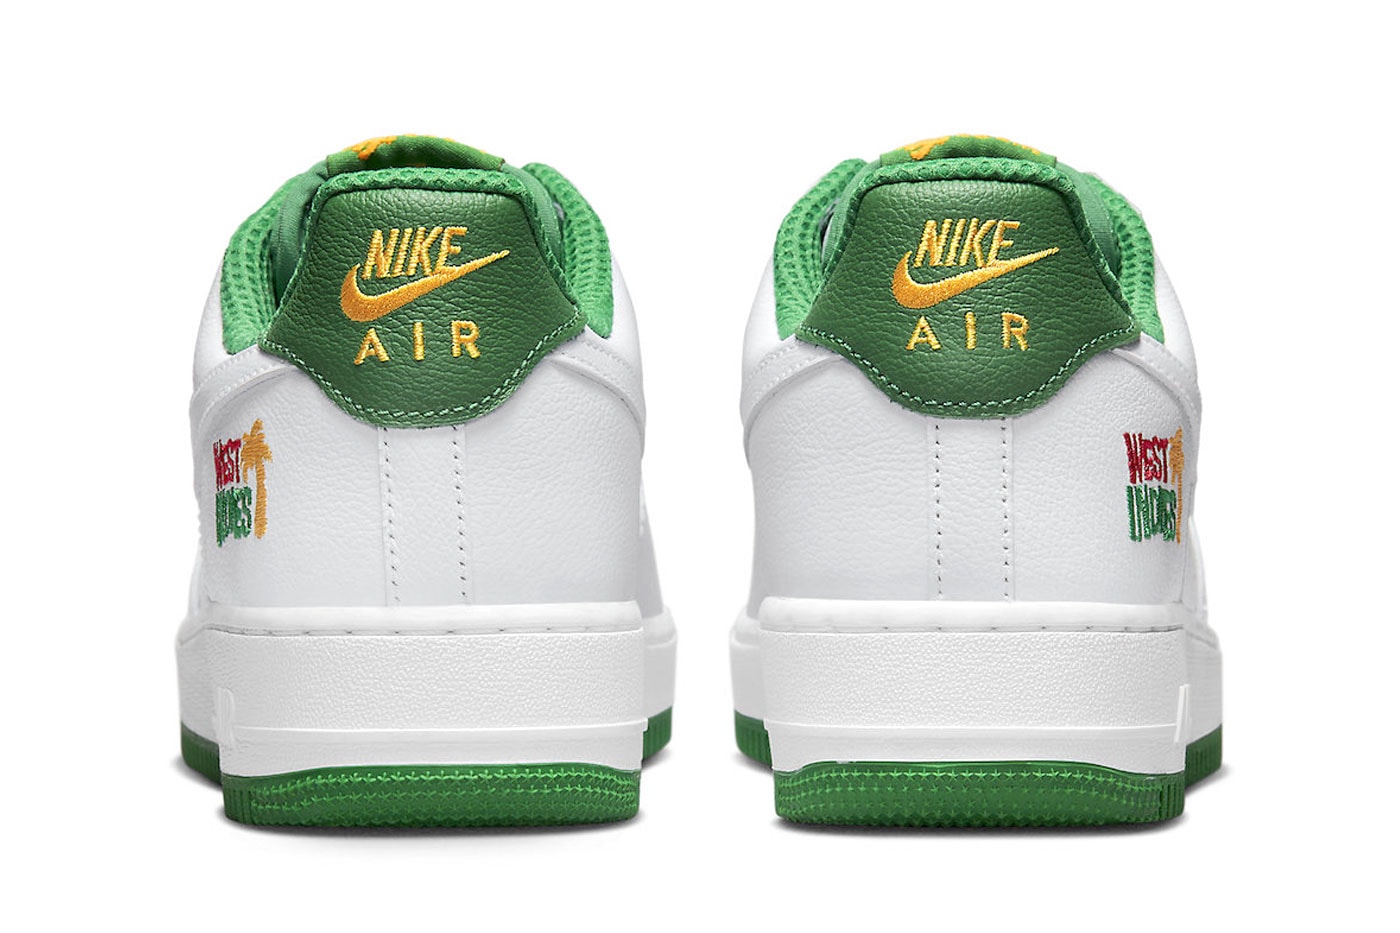 Nike Air Force 1 Low West Indies dx1156 100 classic green white september 2022 140 usd release info date price